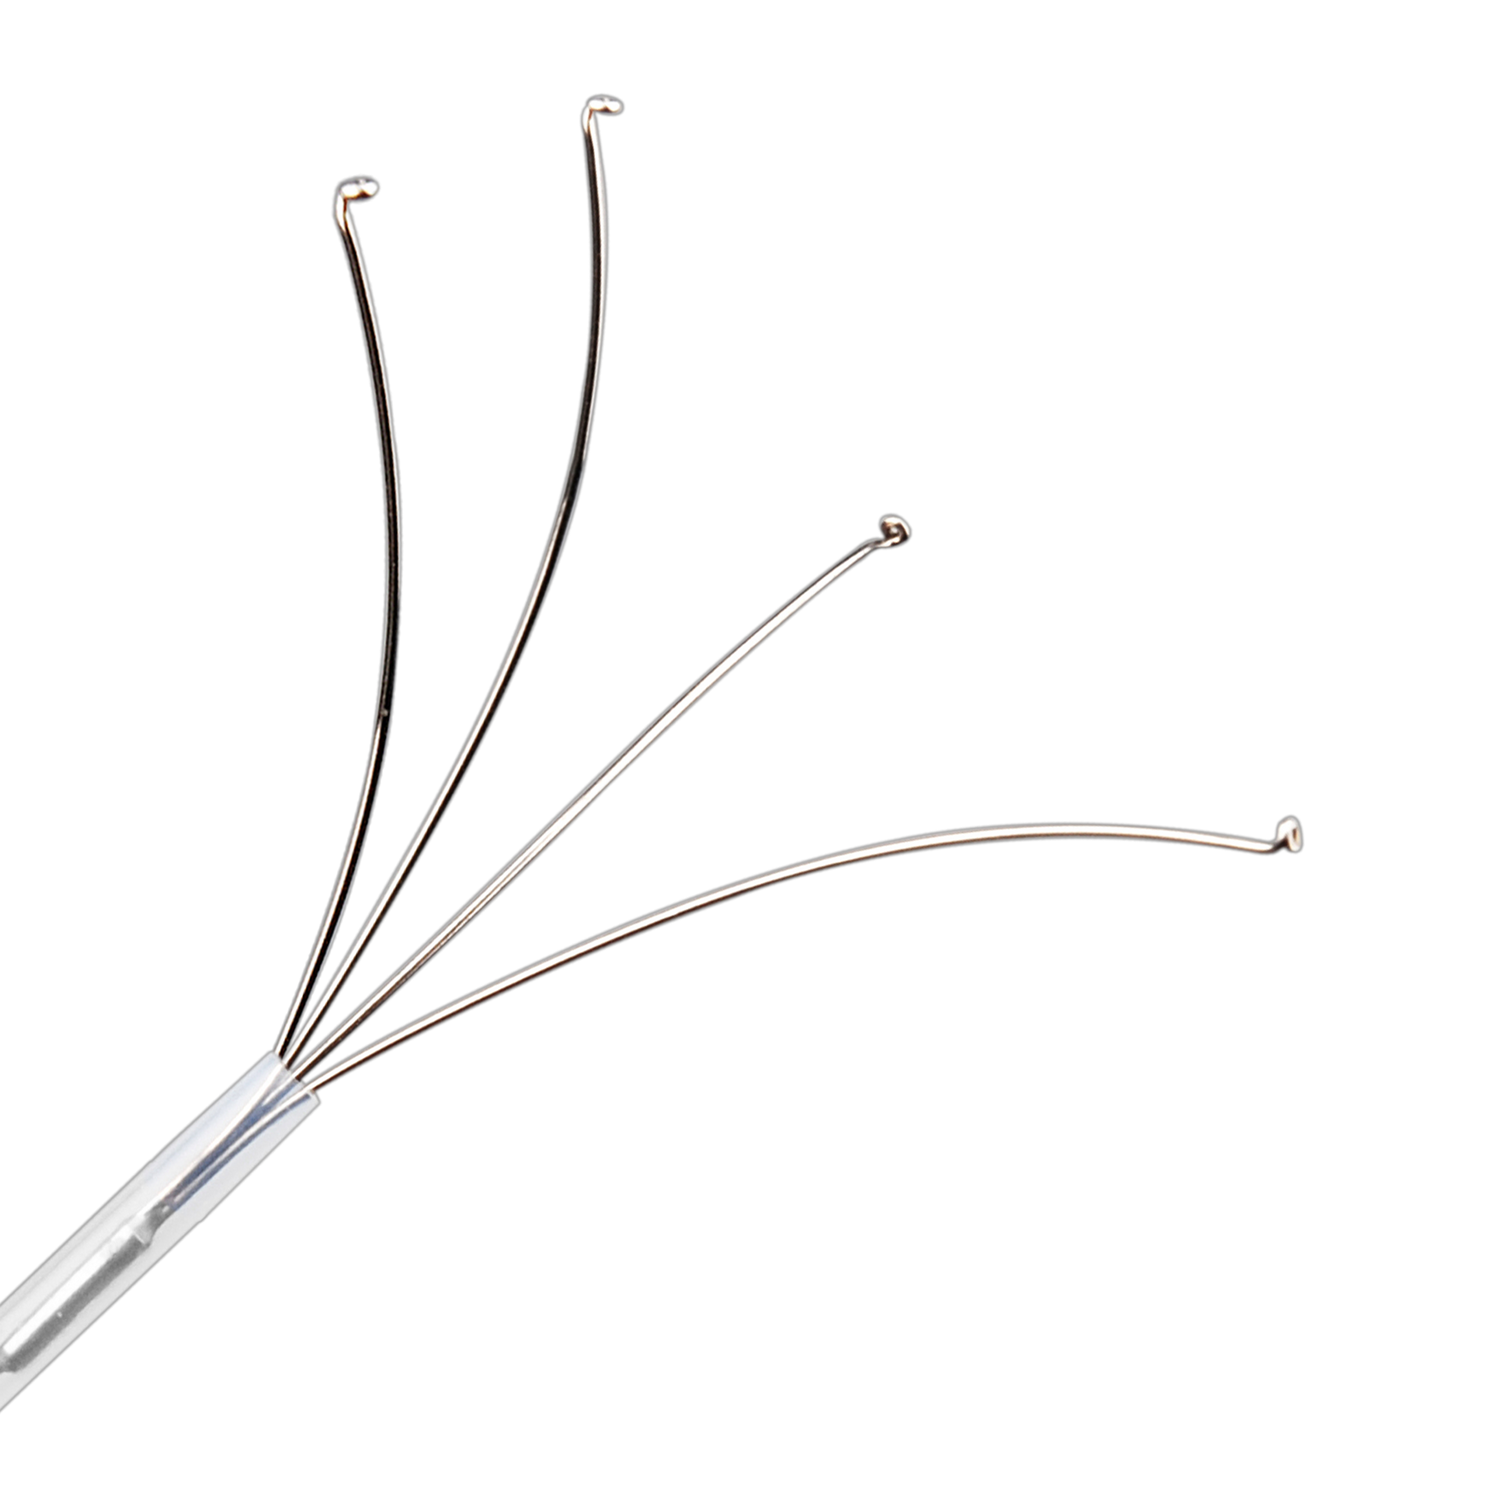 Disposable 4-Prong Type Grasping Forceps with loop, 2.5mm diameter, 230 cm length